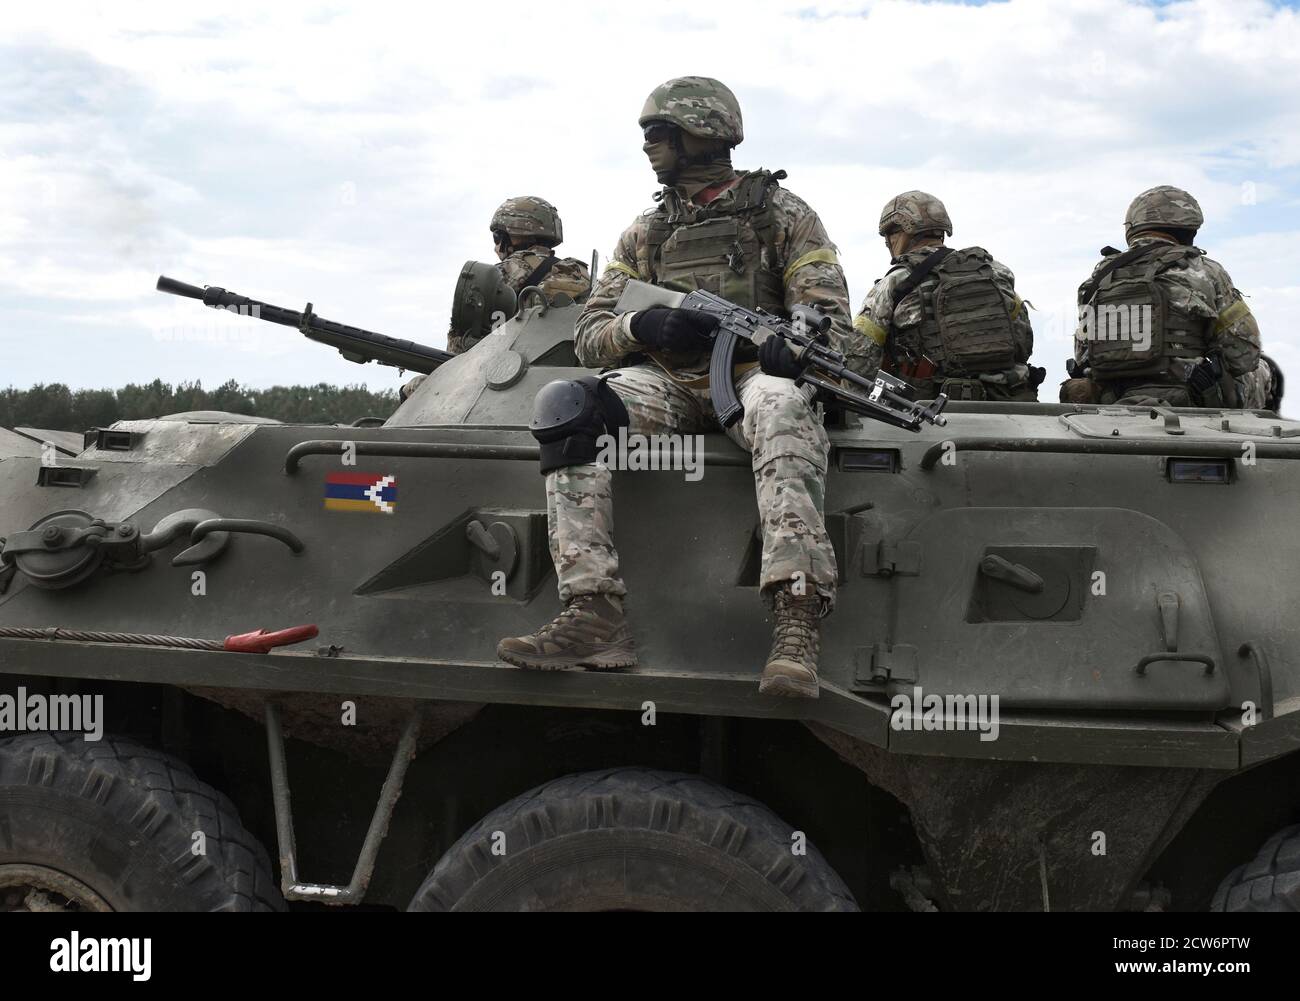 Flag of Flag of Artsakh and also known as Nagorno-Karabakh Republic on an armored personnel carrier and soldiers with machine guns. Collage. Stock Photo